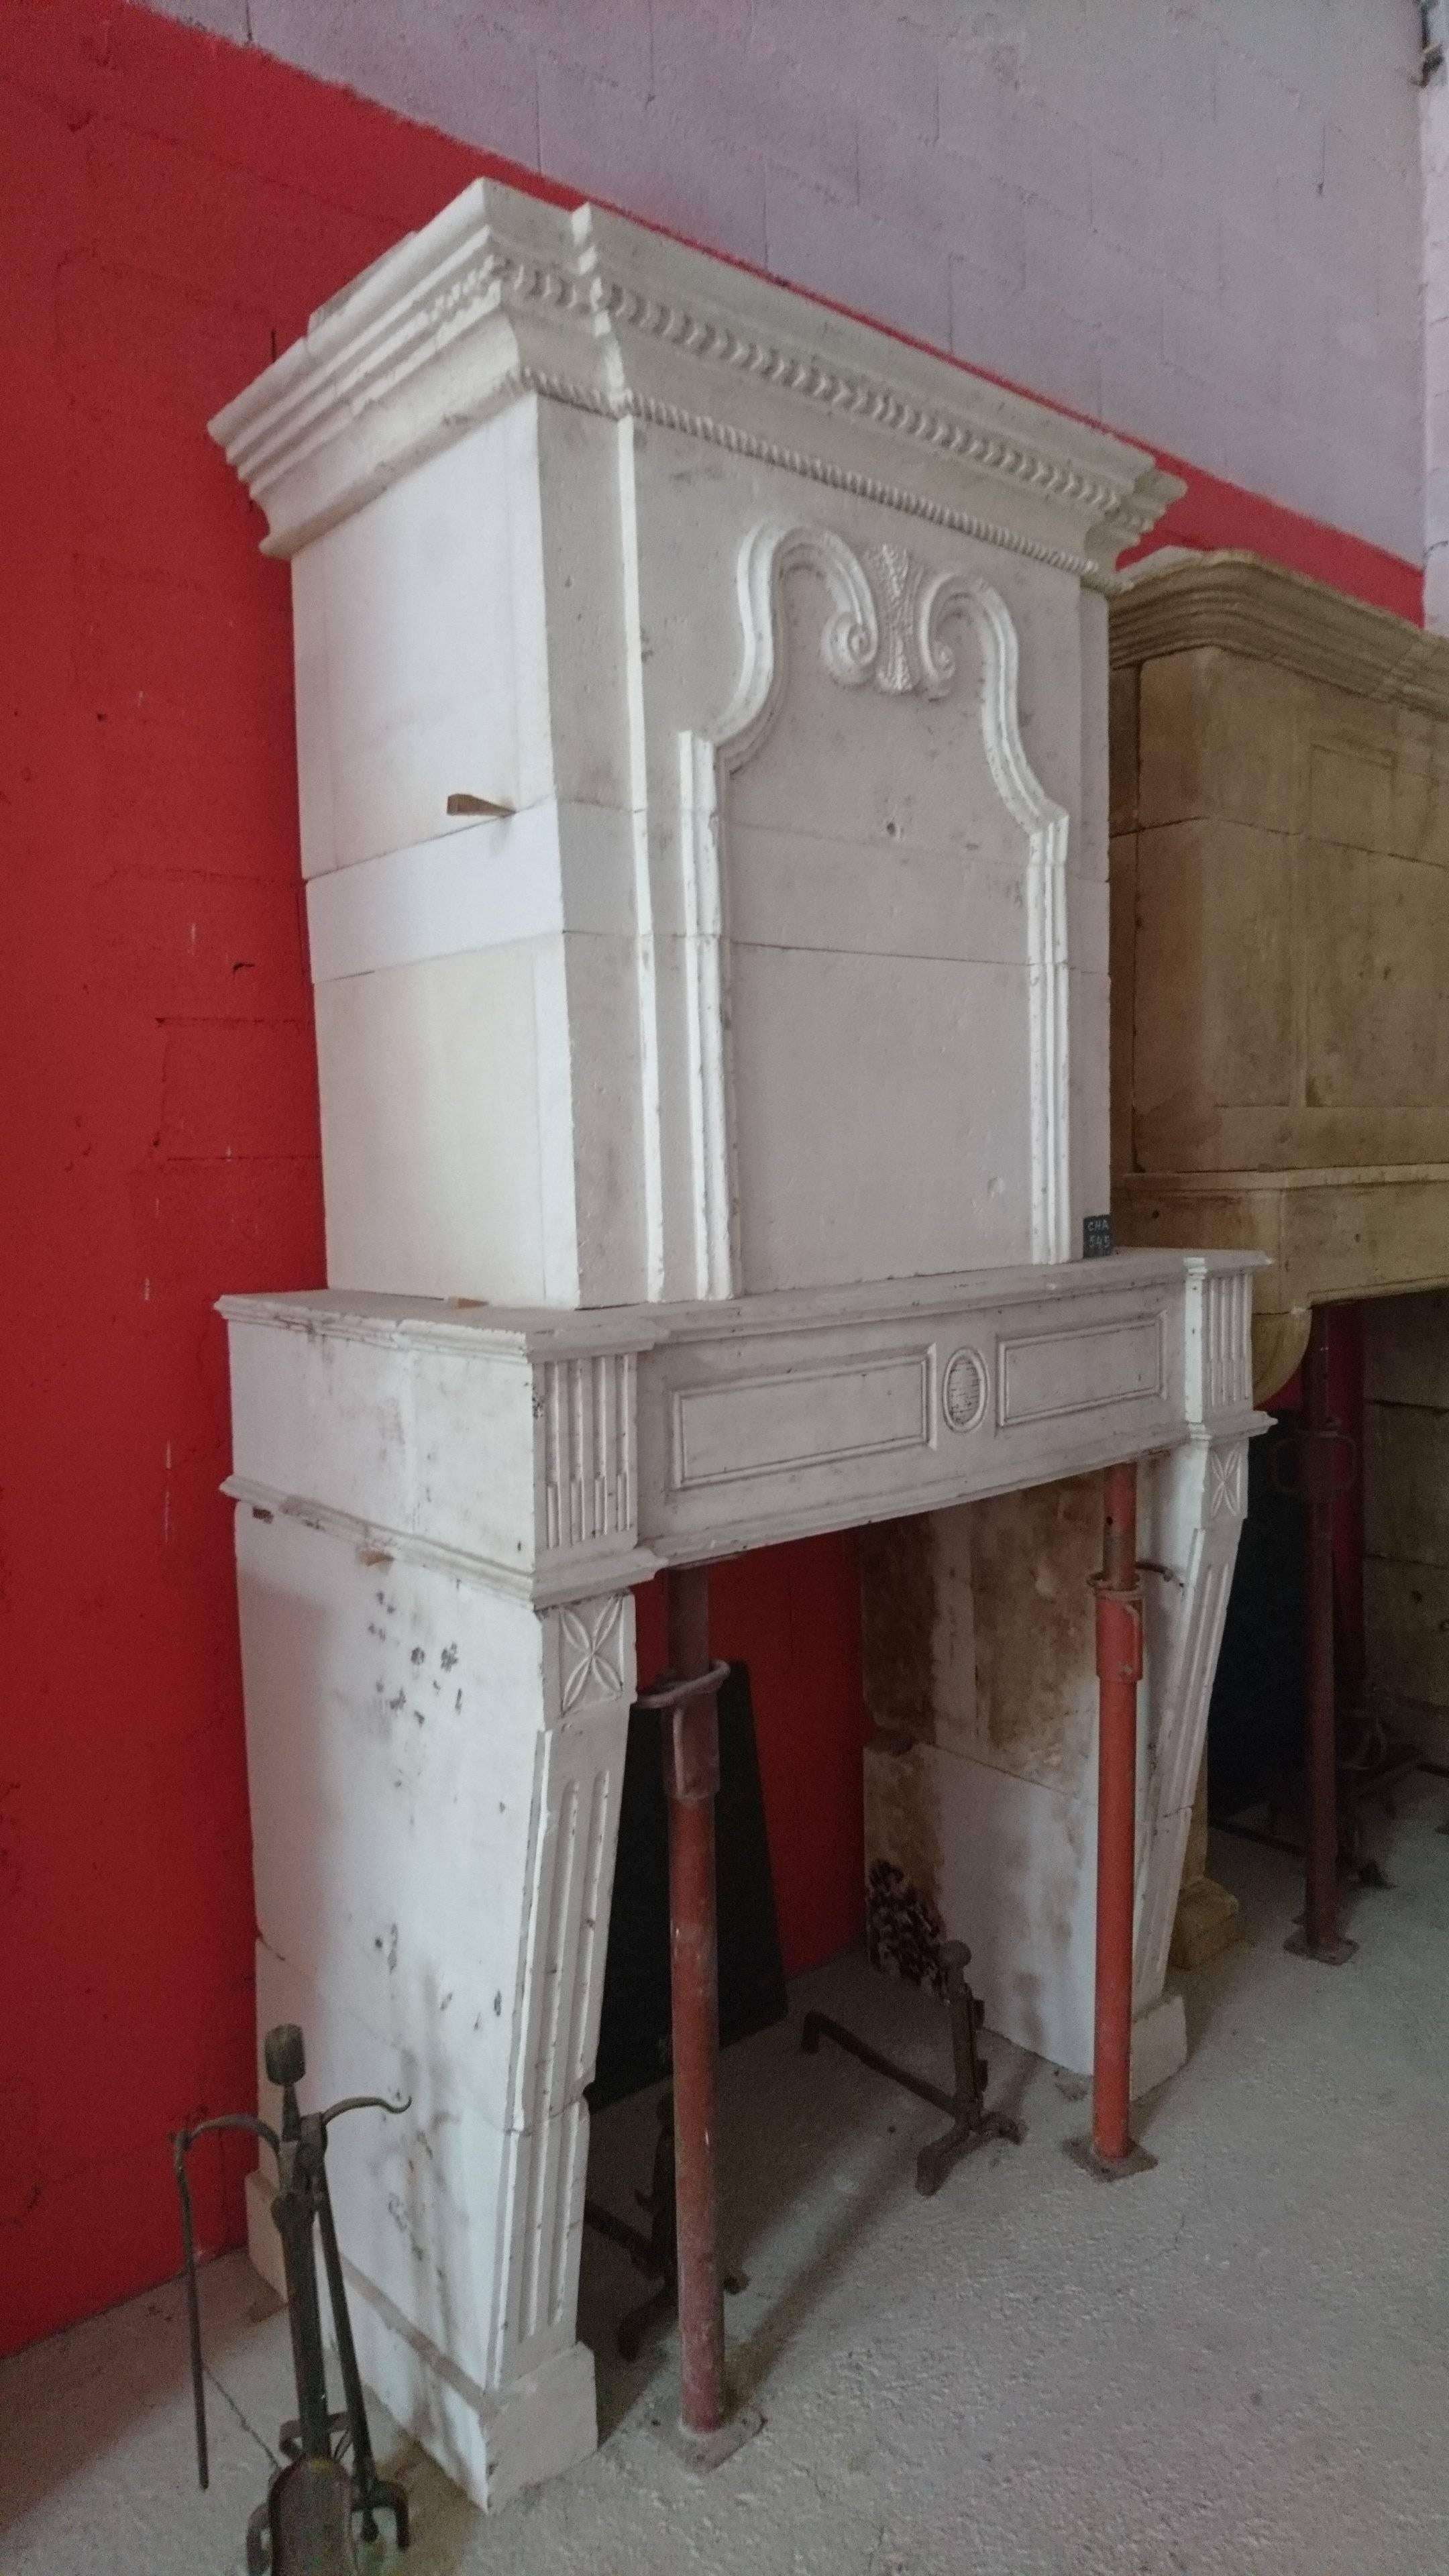 This elegant antique fireplace with trumeau reveals the skilled craftsmanship of the former stonecutter of the 18th century that carved it into the stone of Saint-Vaise (a white natural limestone once excavated in subterranean quarries in the South